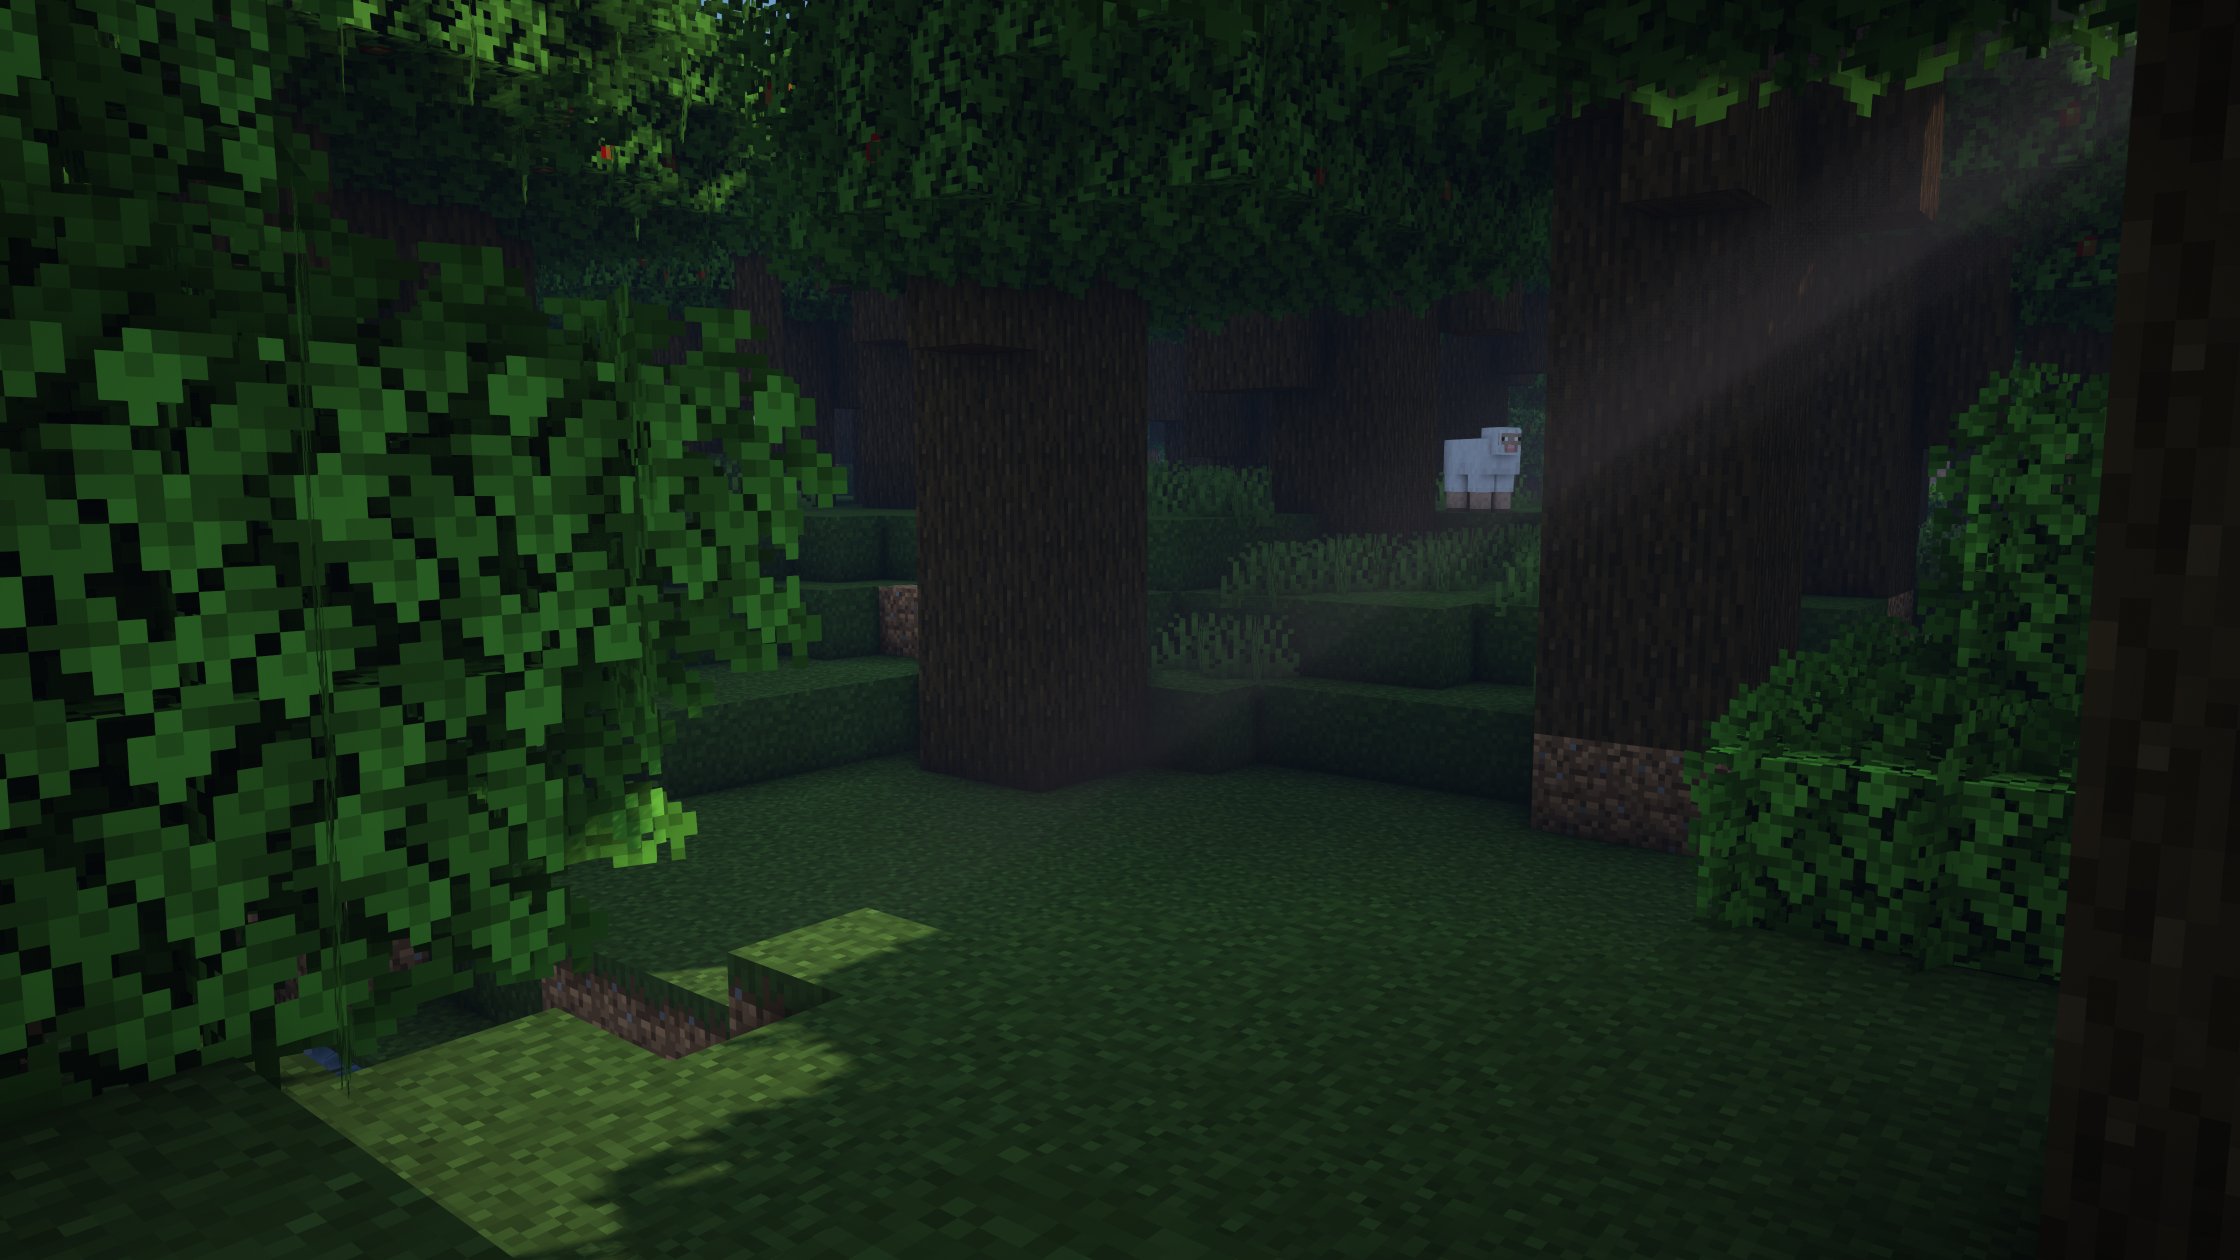 Fwhip Bryce I Think Roofed Forest Biome Shaders Is One Of My Favorite Things To Walk Around In In A Fresh Minecraft World Before Building Anything What About